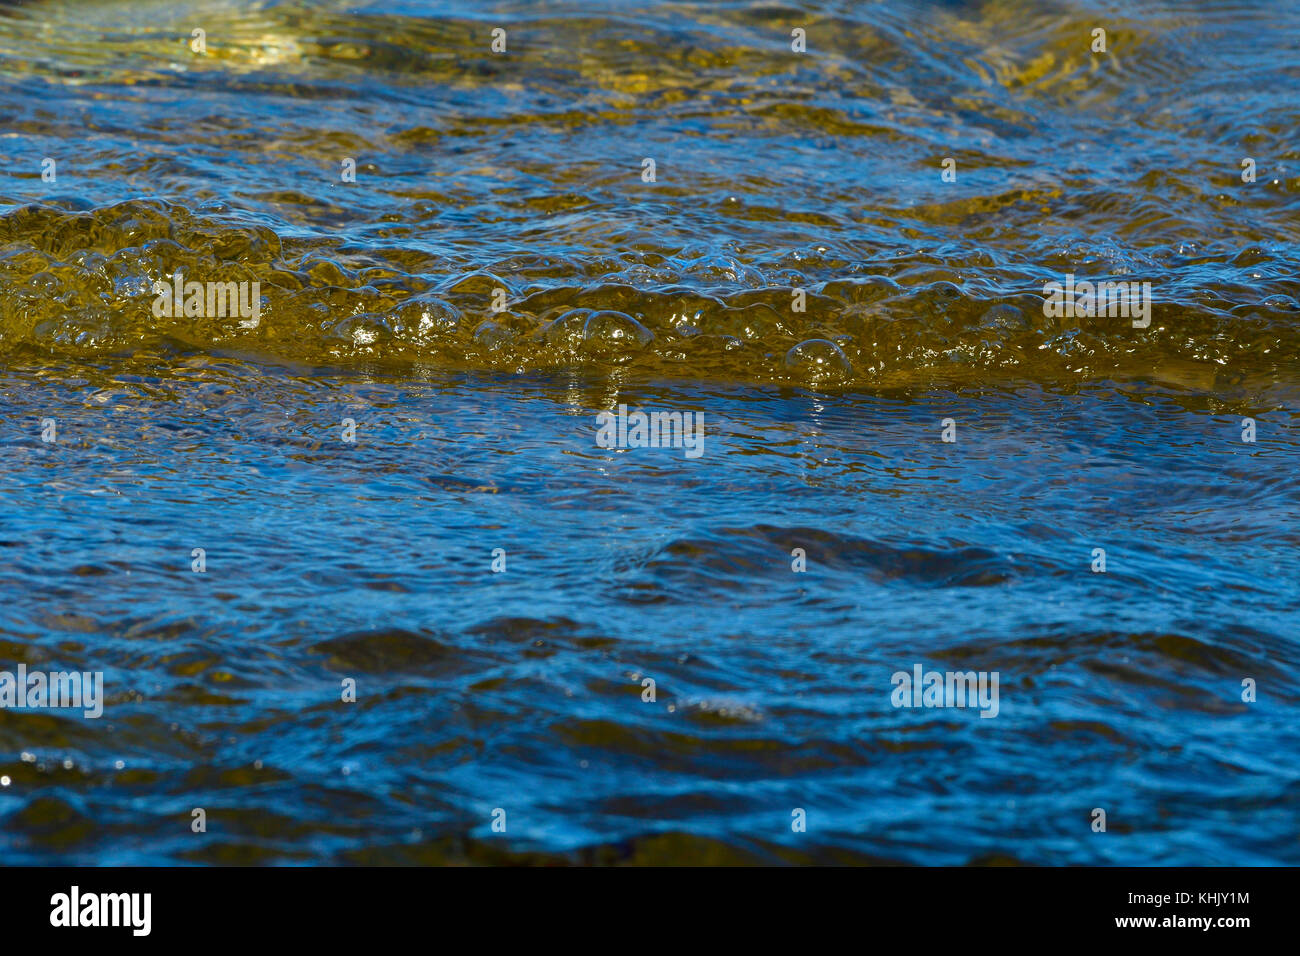 A close up image of some ocean waves rippling into shore creating some bubbles on Vancouver Island British Columbia Canada. Stock Photo